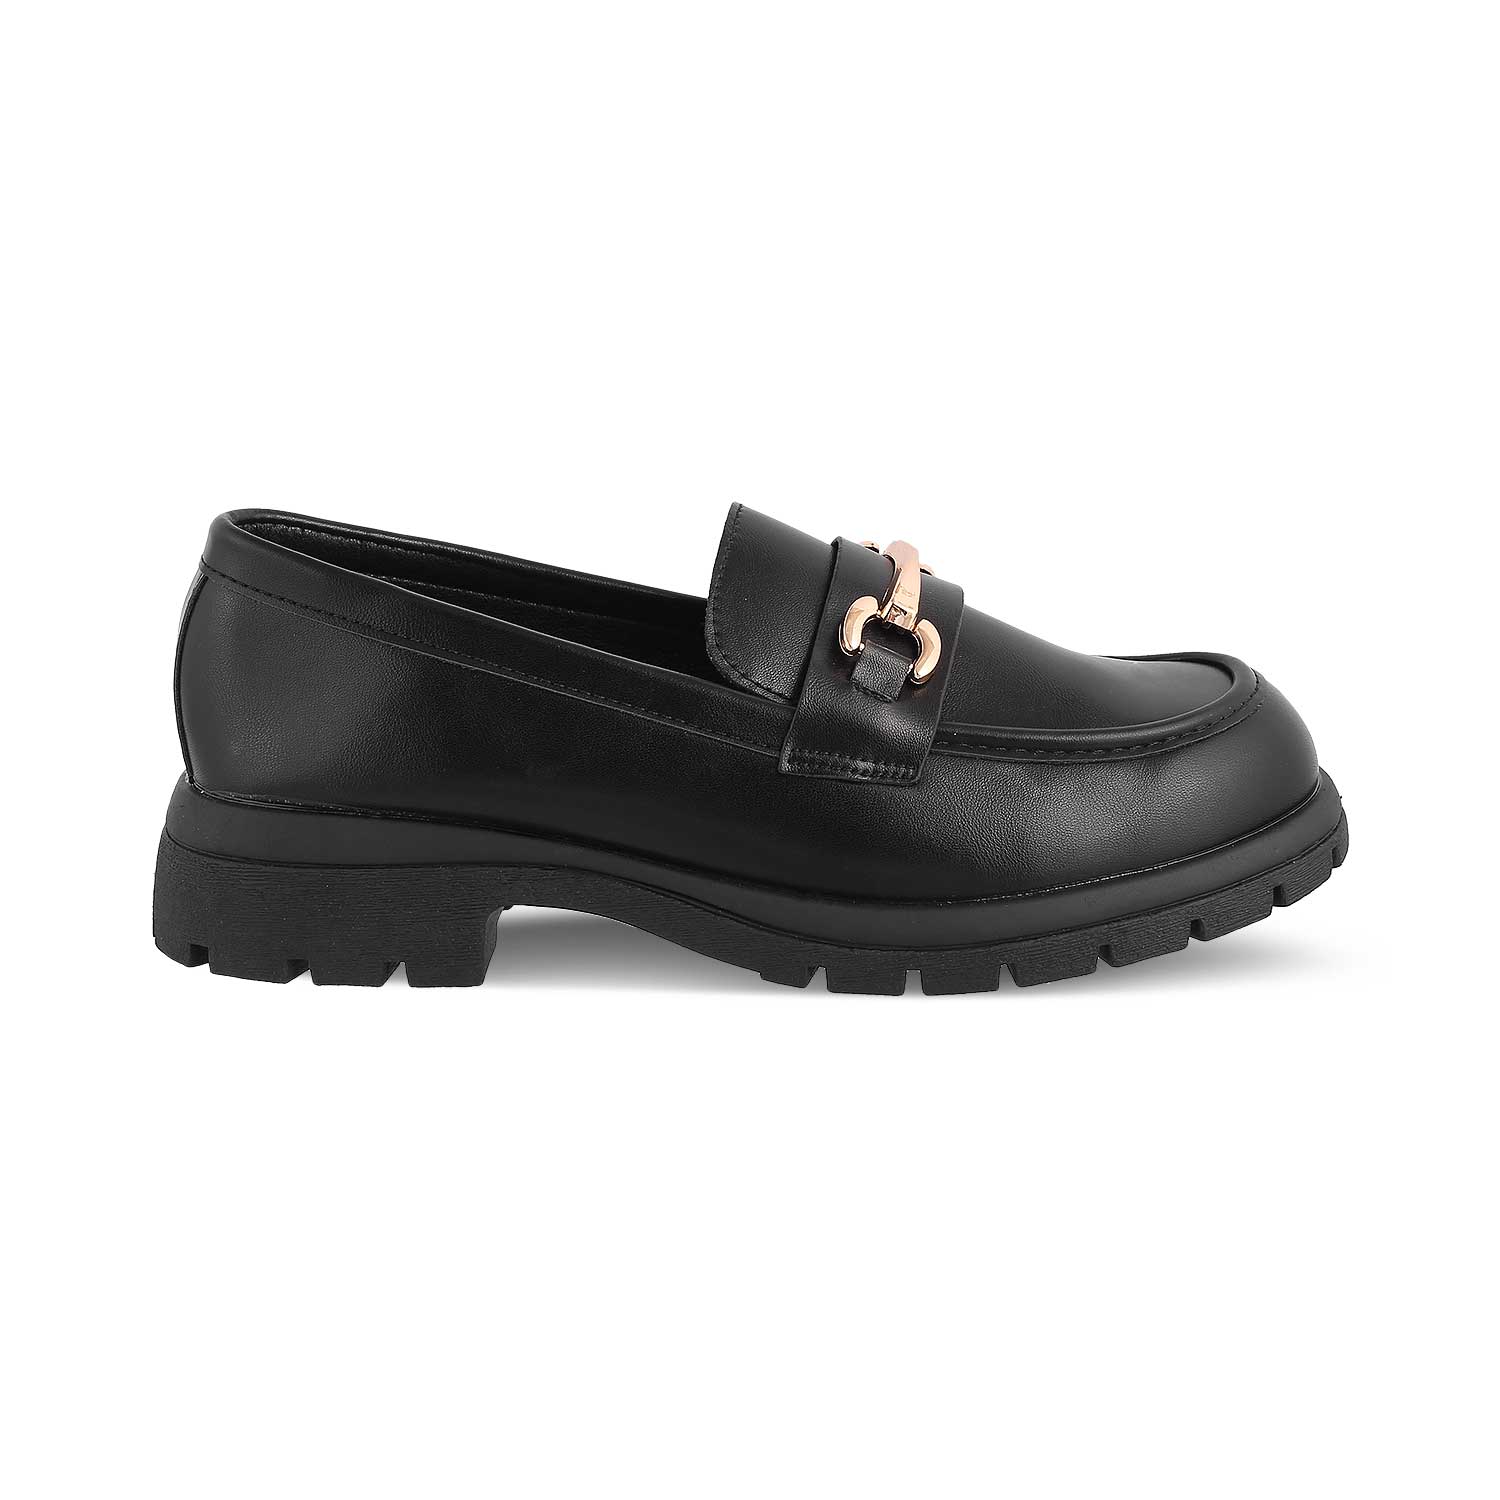 The Helsi Black Women's Dress Chunky Sole Loafers Tresmode - Tresmode